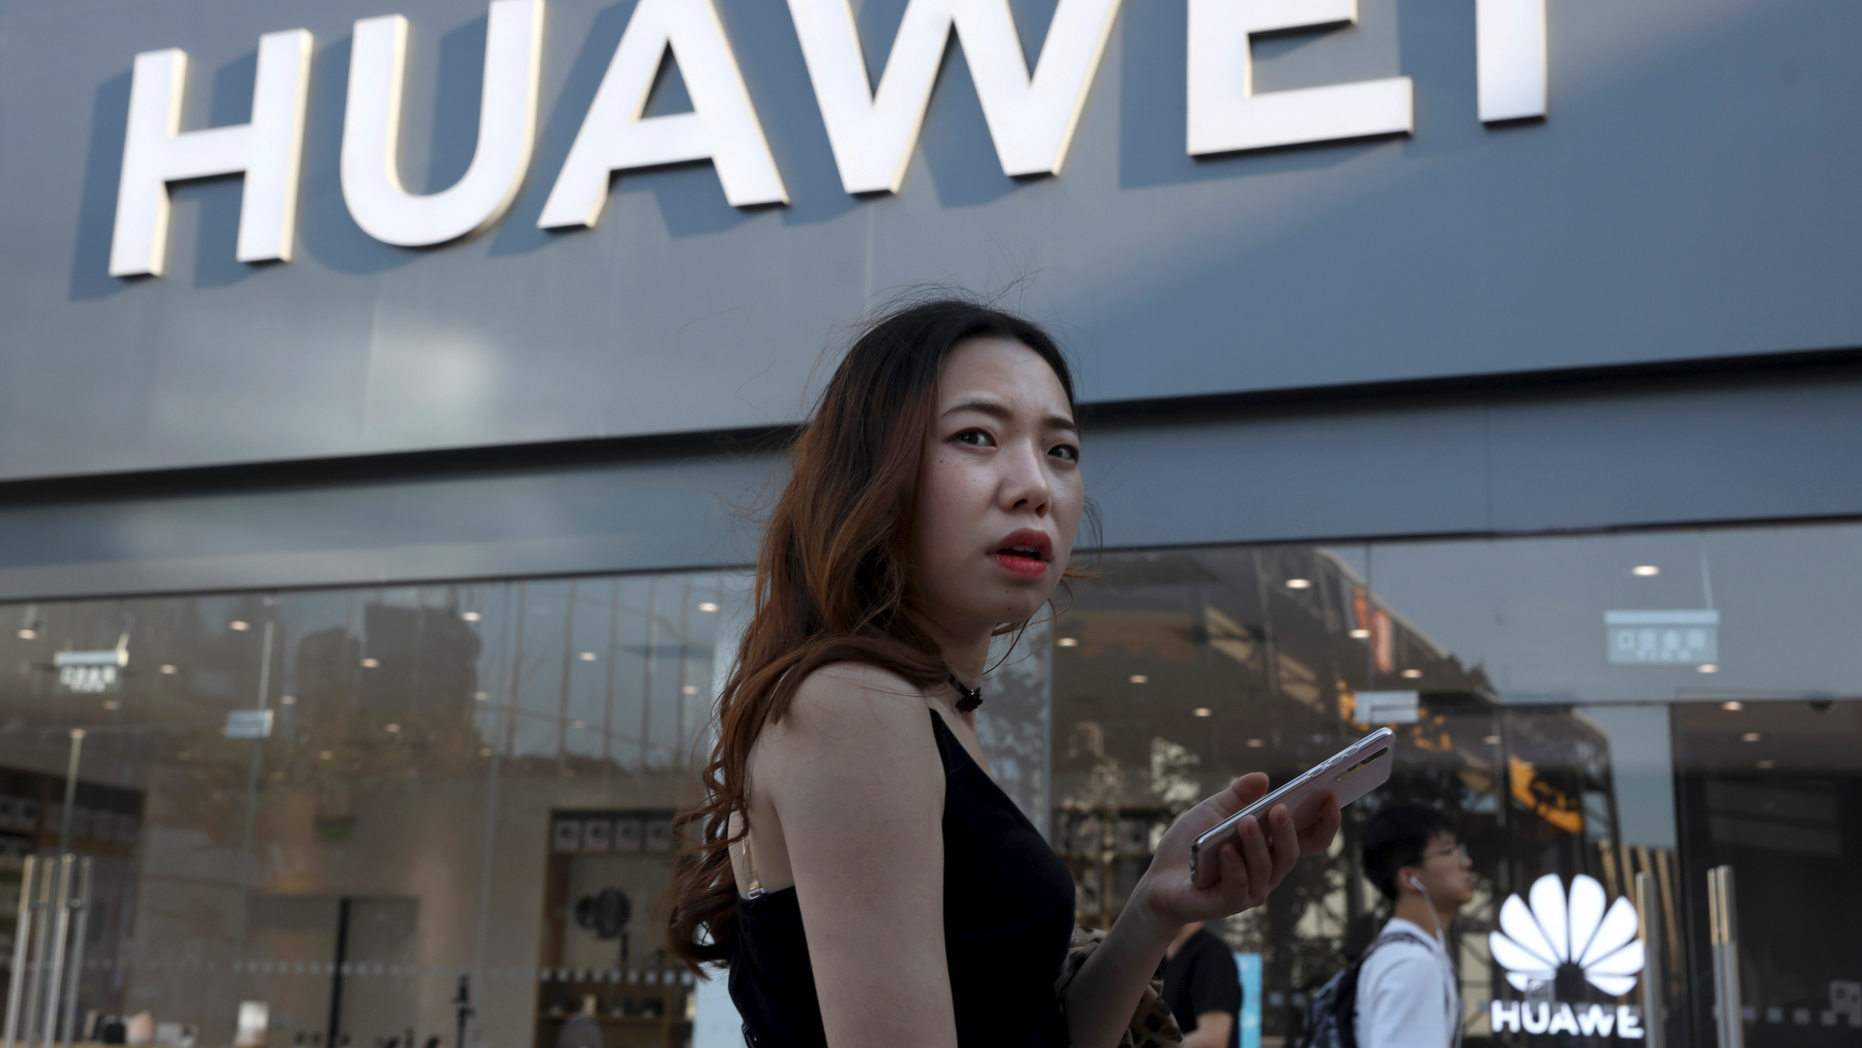 A woman uses a smartphone outside a Huawei store in Beijing Monday, May 20, 2019. Google is assuring users of Huawei smartphones the American company's services still will work on them following U.S. government restrictions on doing business with the Chinese tech giant. (AP Photo/Ng Han Guan)